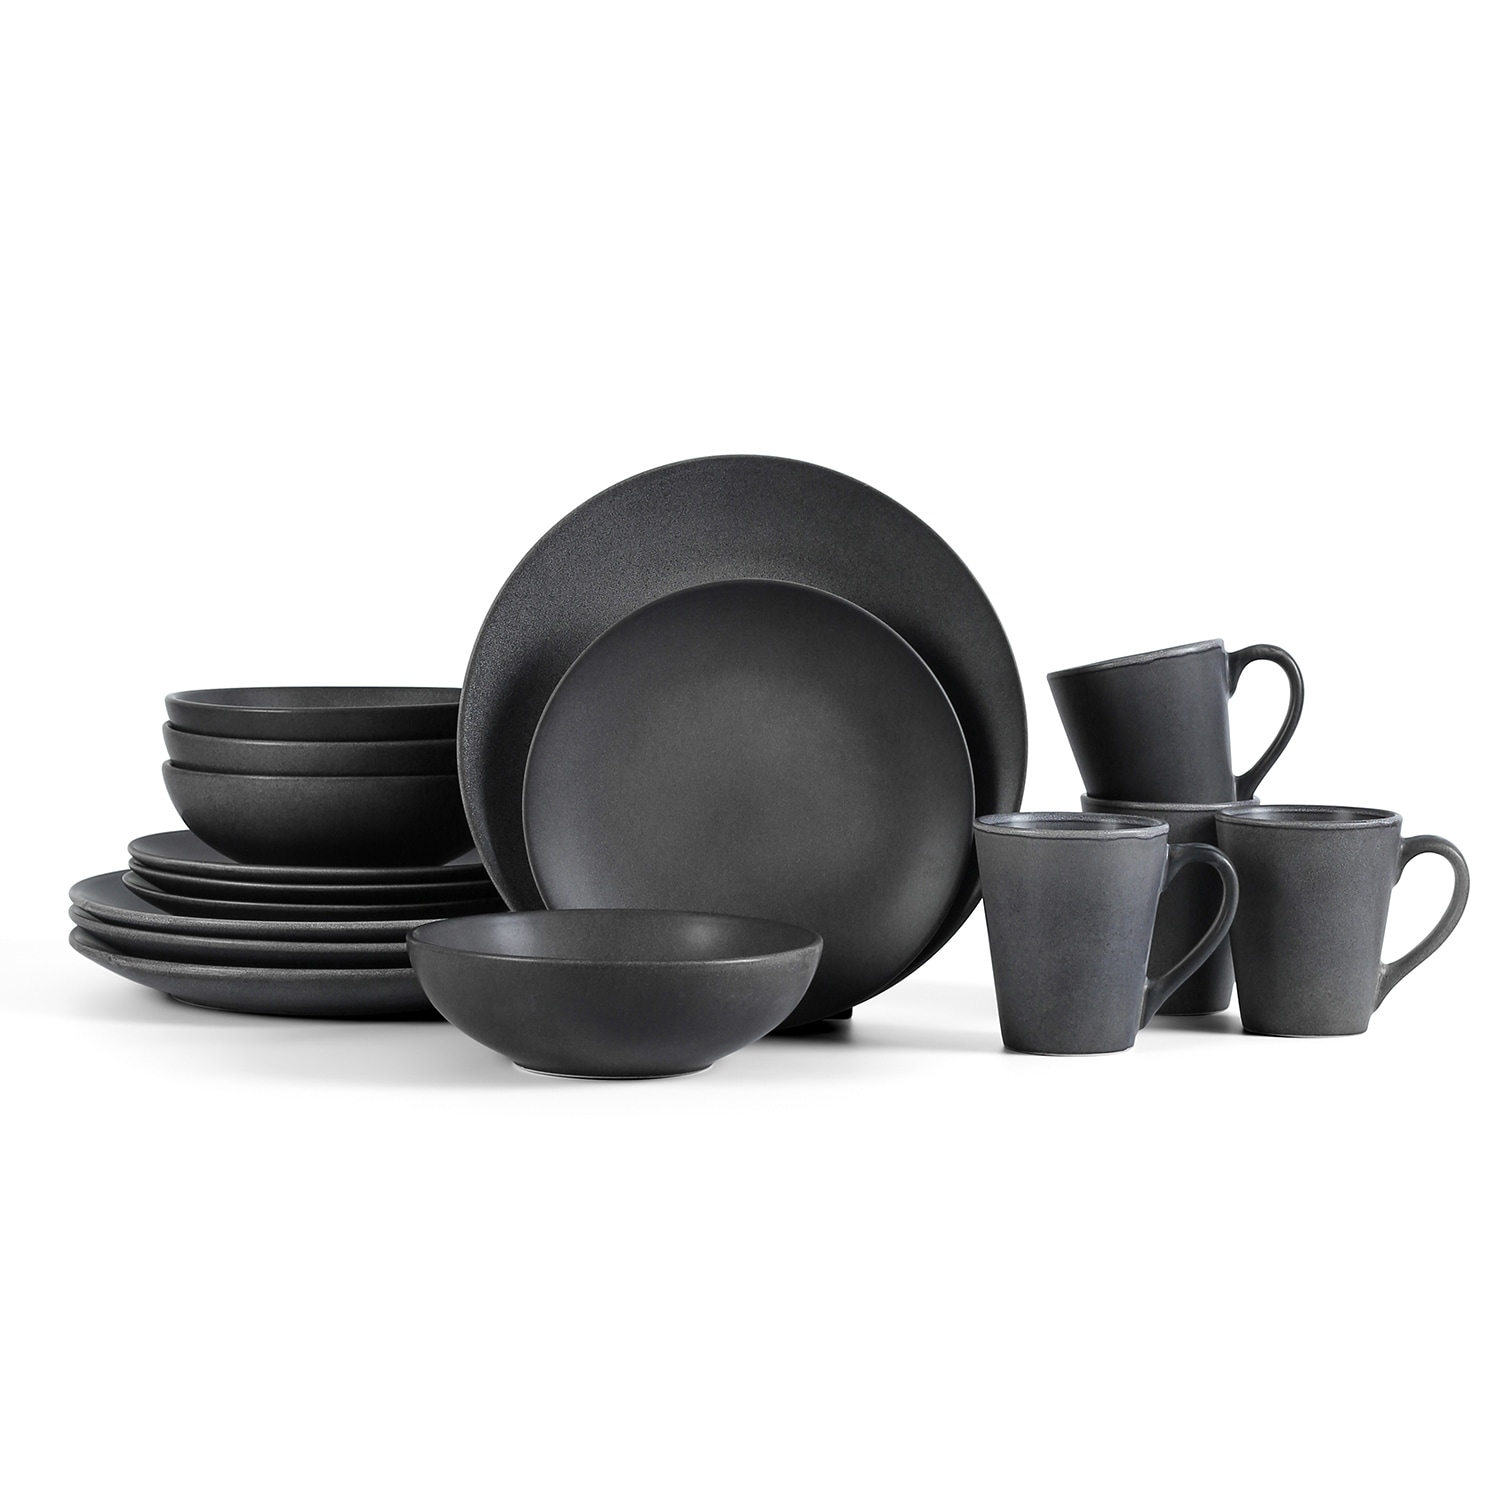 Kitchen Accessories Shopping Guide: All Black Everything by Albie